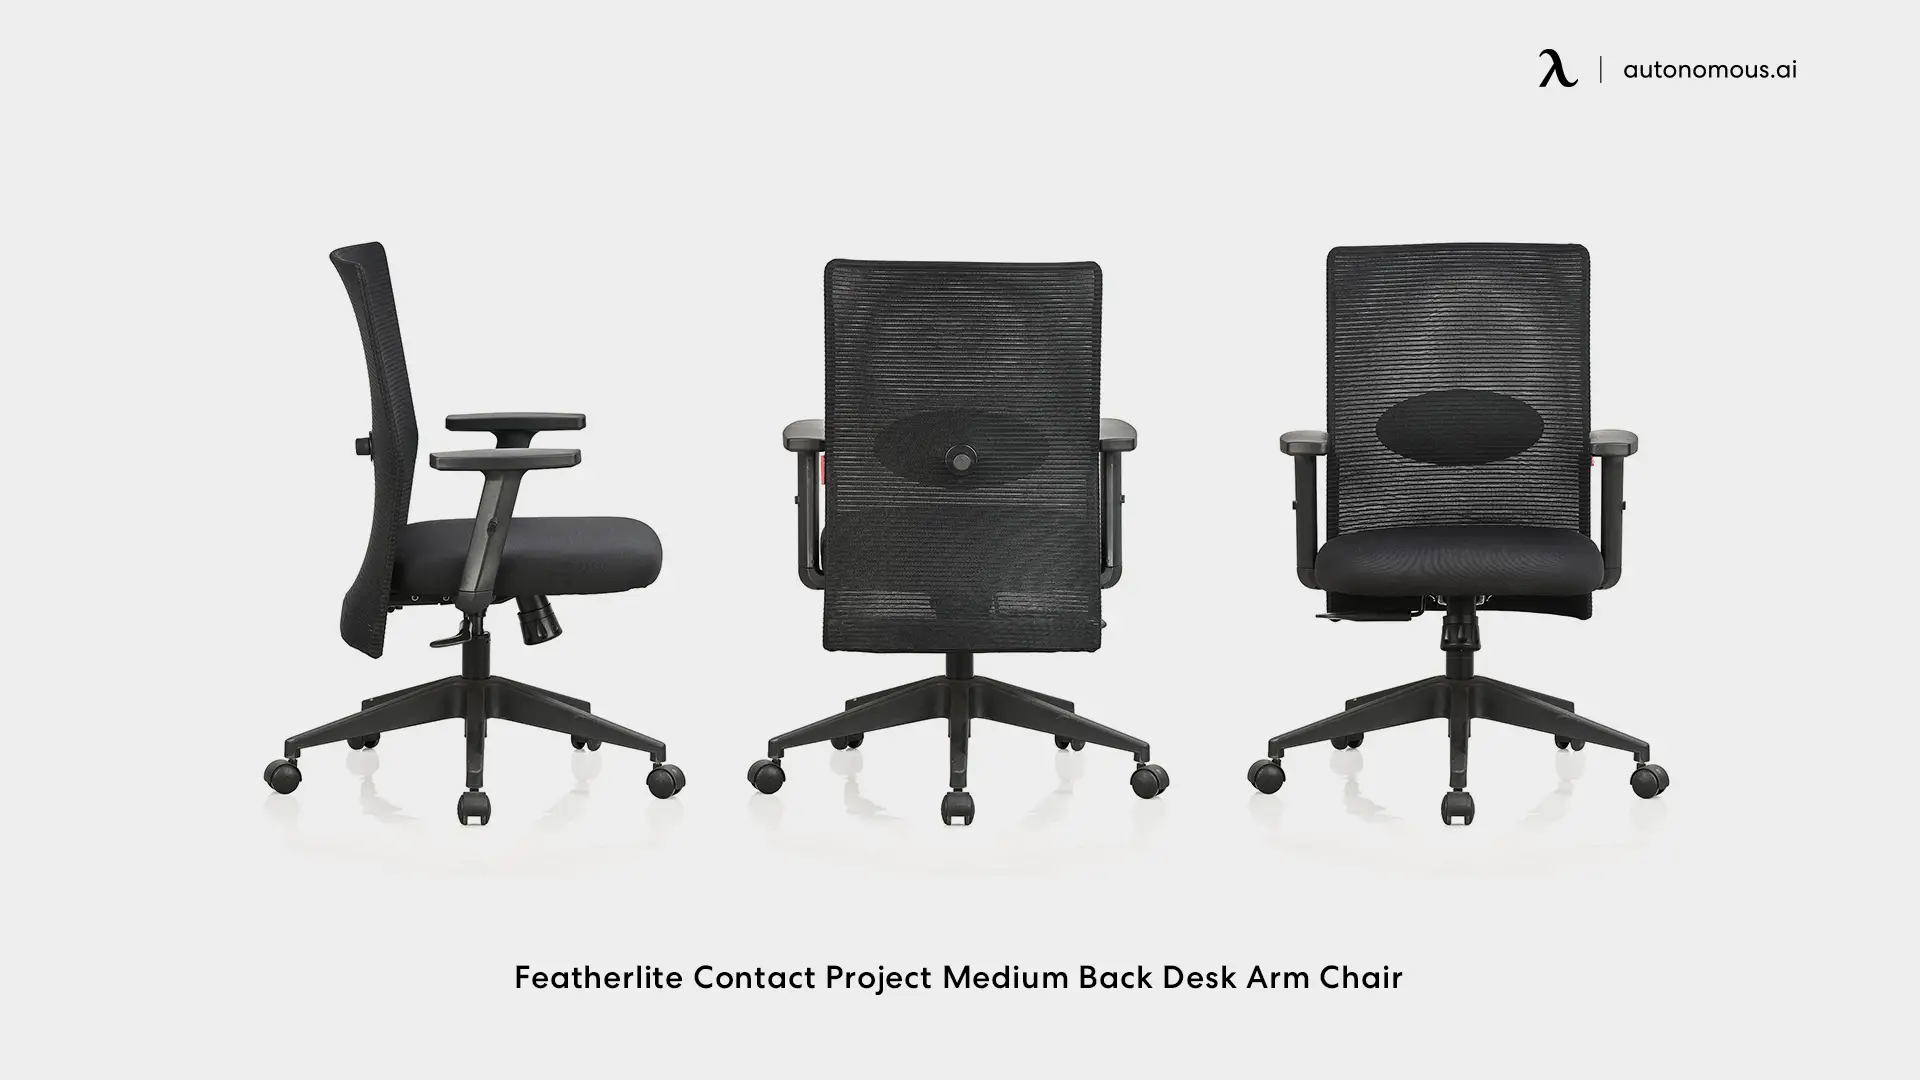 Featherlite Contact Project Medium Back Desk Arm Chair